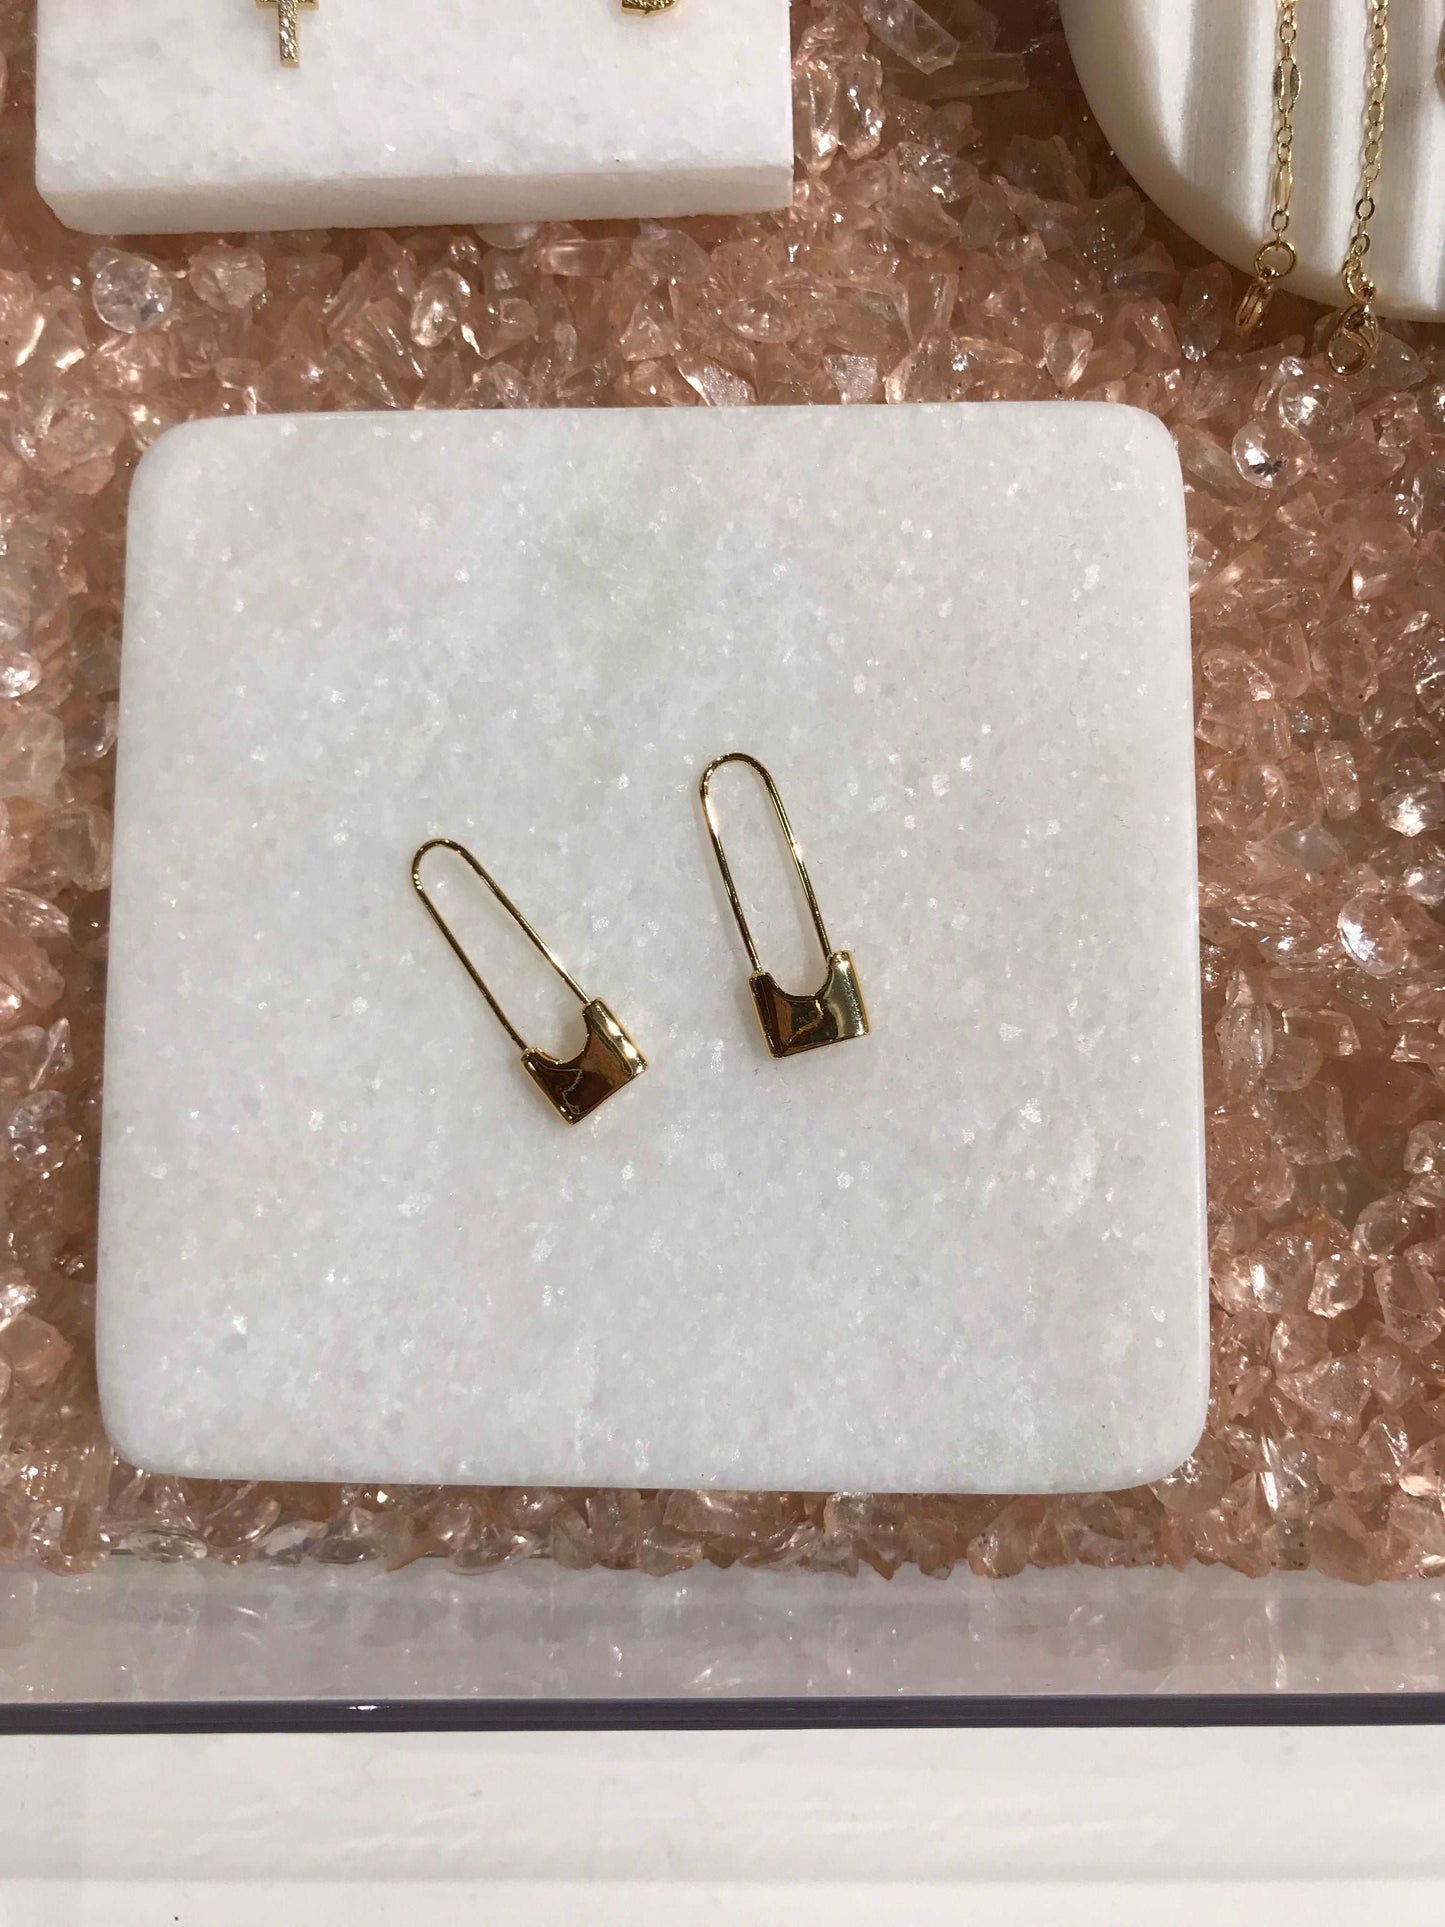 Safety Pin earrings